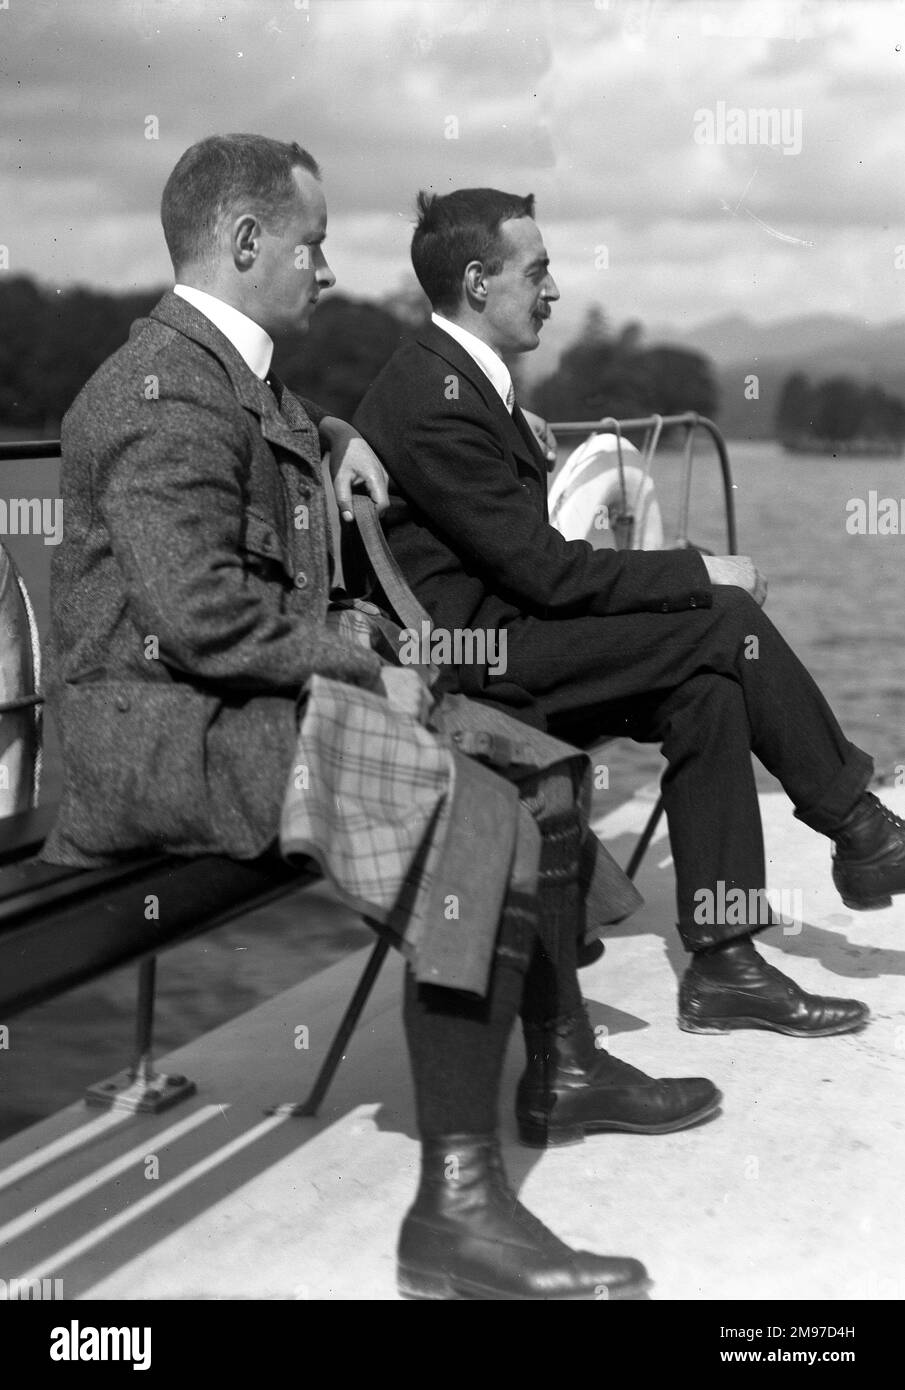 Edwardian gentlemen on a boat in the Lake District, believed to be Coniston, showing a relaxed and refined air with contemporary style. Stock Photo